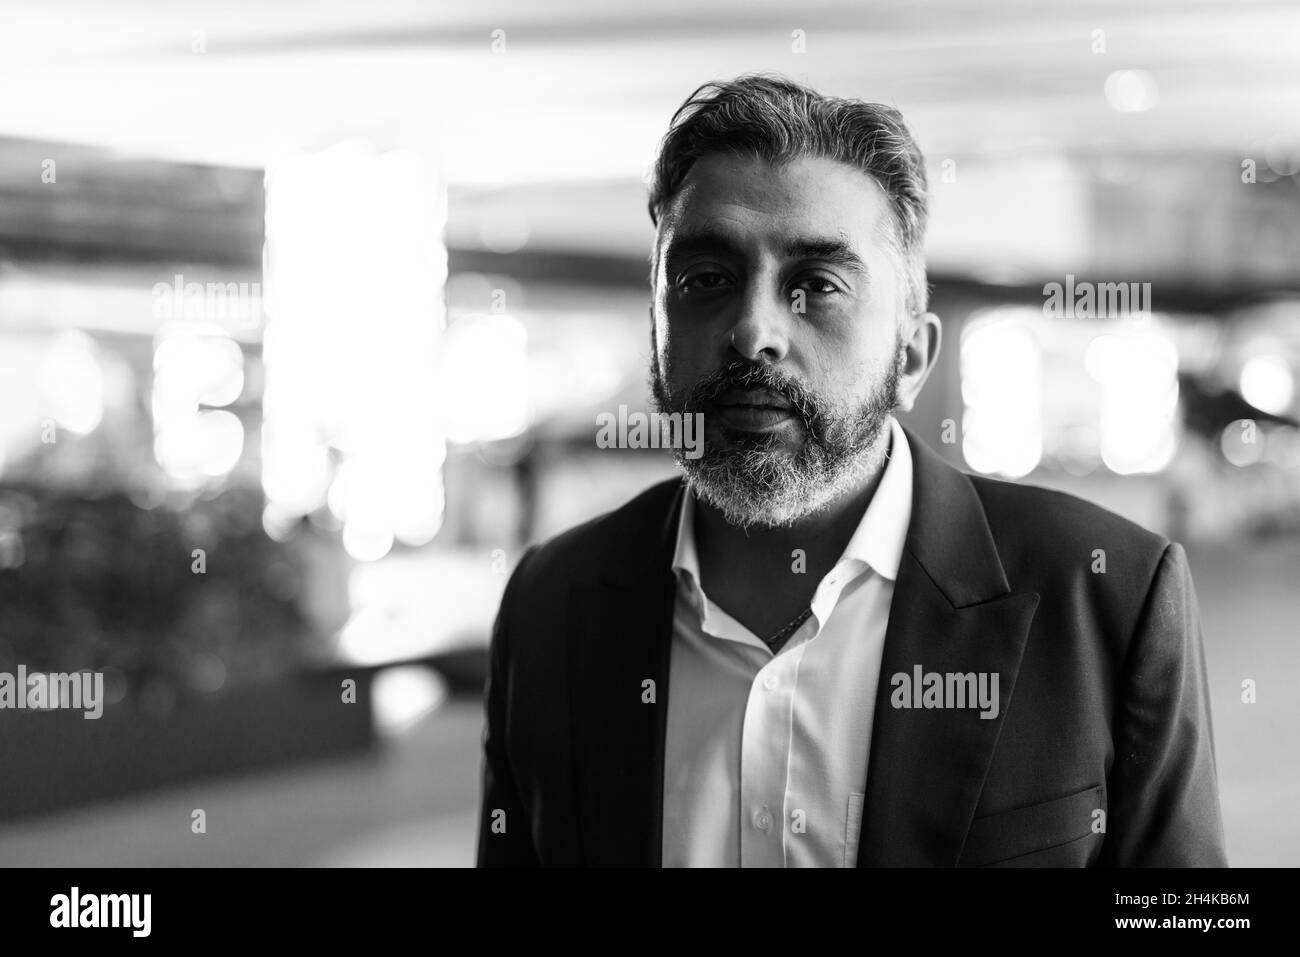 Black and white portrait of handsome Indian businessman in city at night Stock Photo